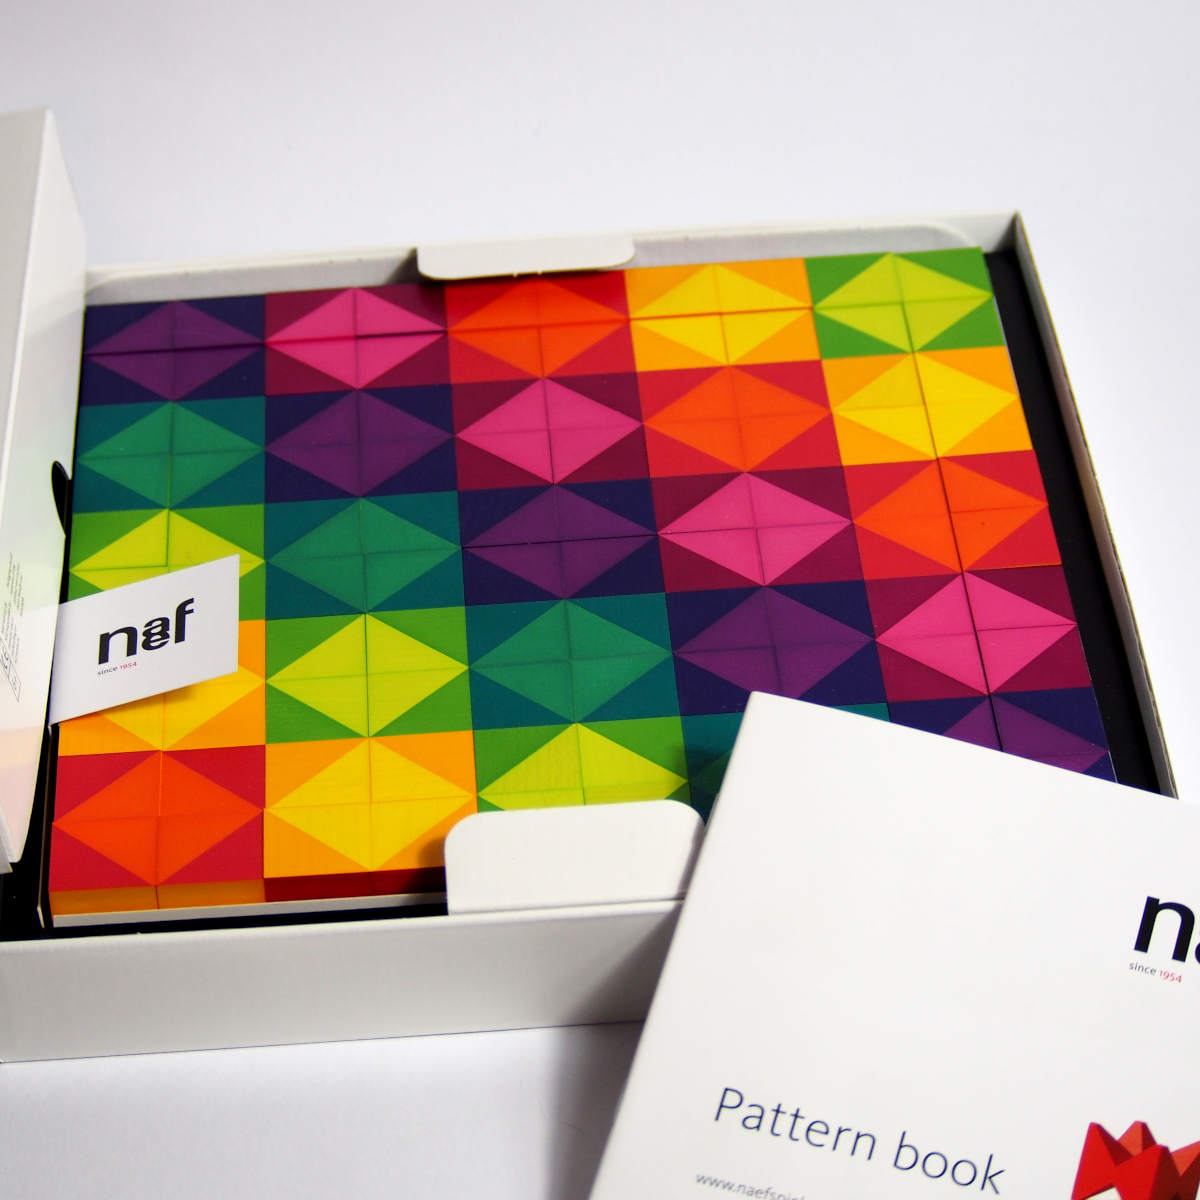 Mosaic 100 – Original Naef Game with Color Blocks, made of Wood